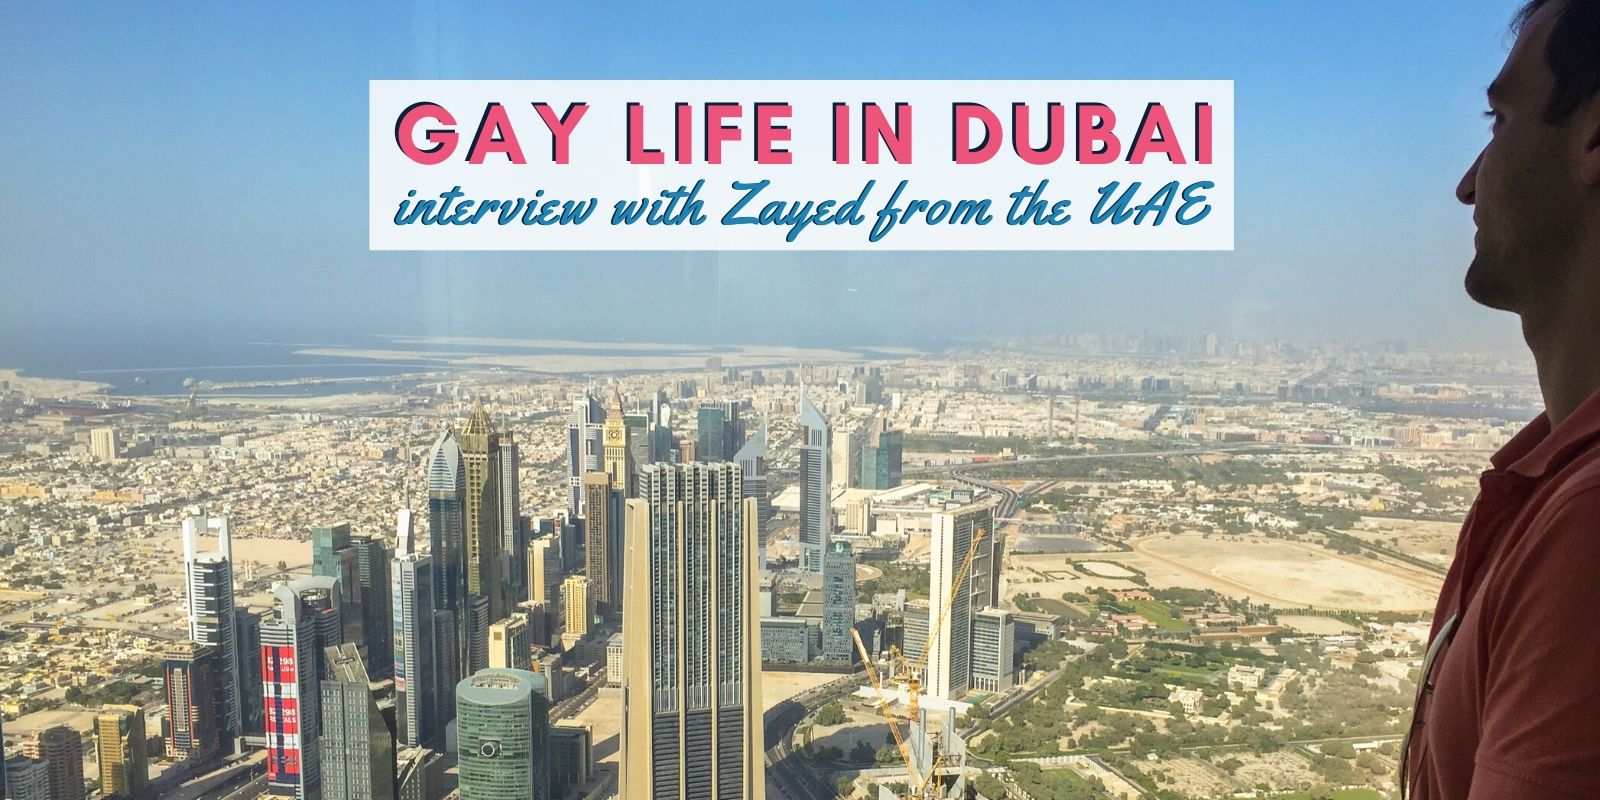 Find out what it's like to grow up and live in Dubai as a gay man in our interview with local guy Zayed